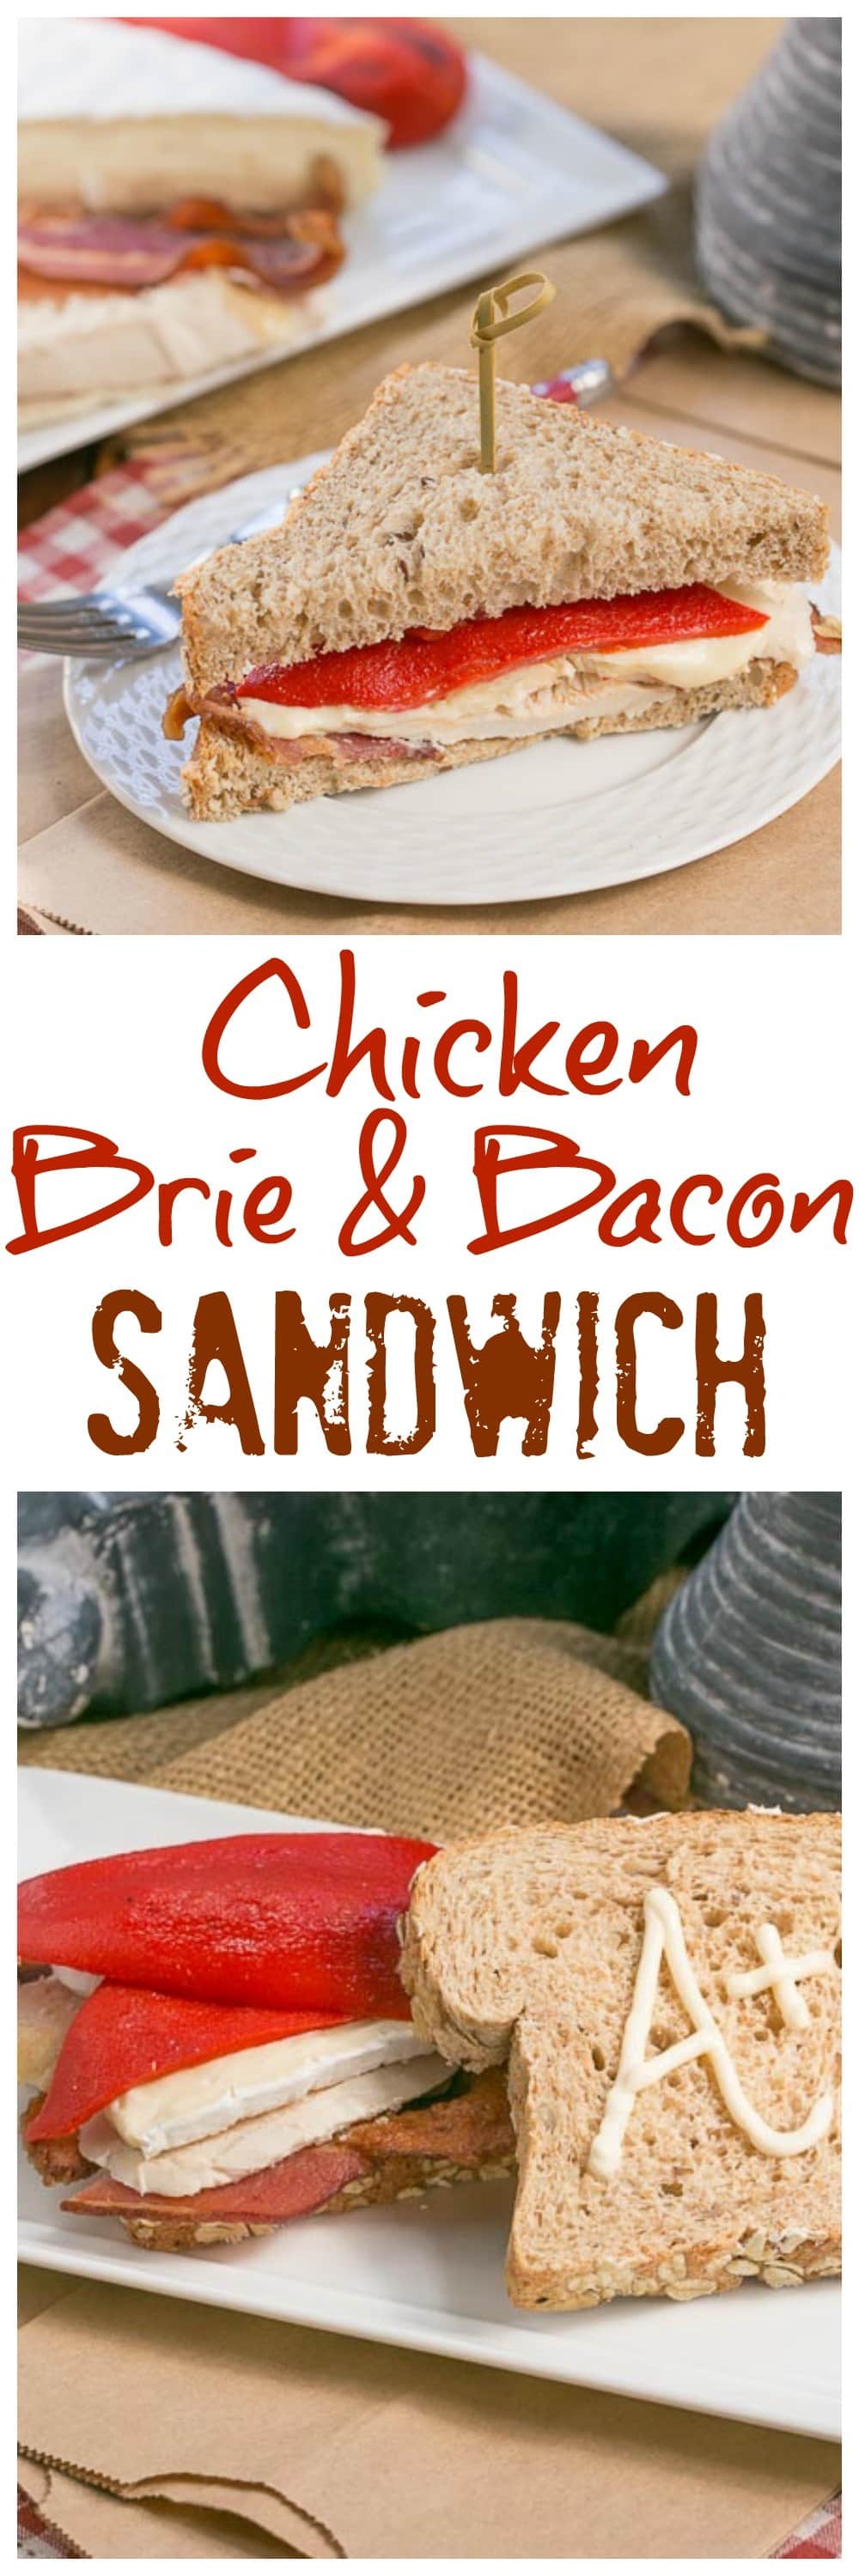 Roasted Chicken Brie and Bacon Sandwich | A scrumptious sandwich that'would perk up any lunch box!